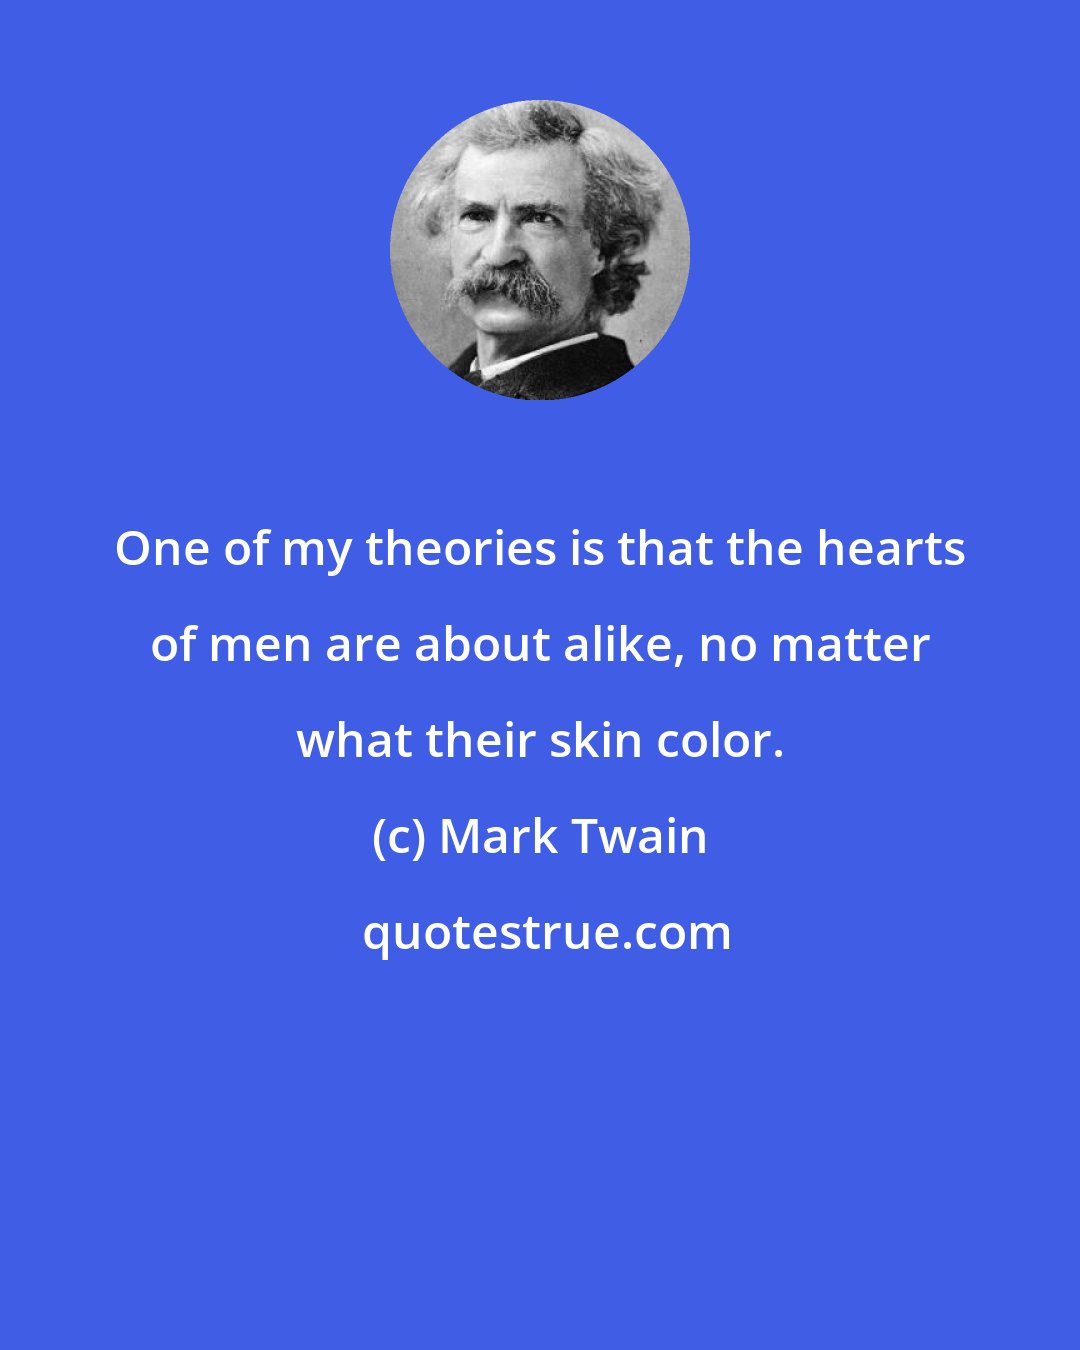 Mark Twain: One of my theories is that the hearts of men are about alike, no matter what their skin color.